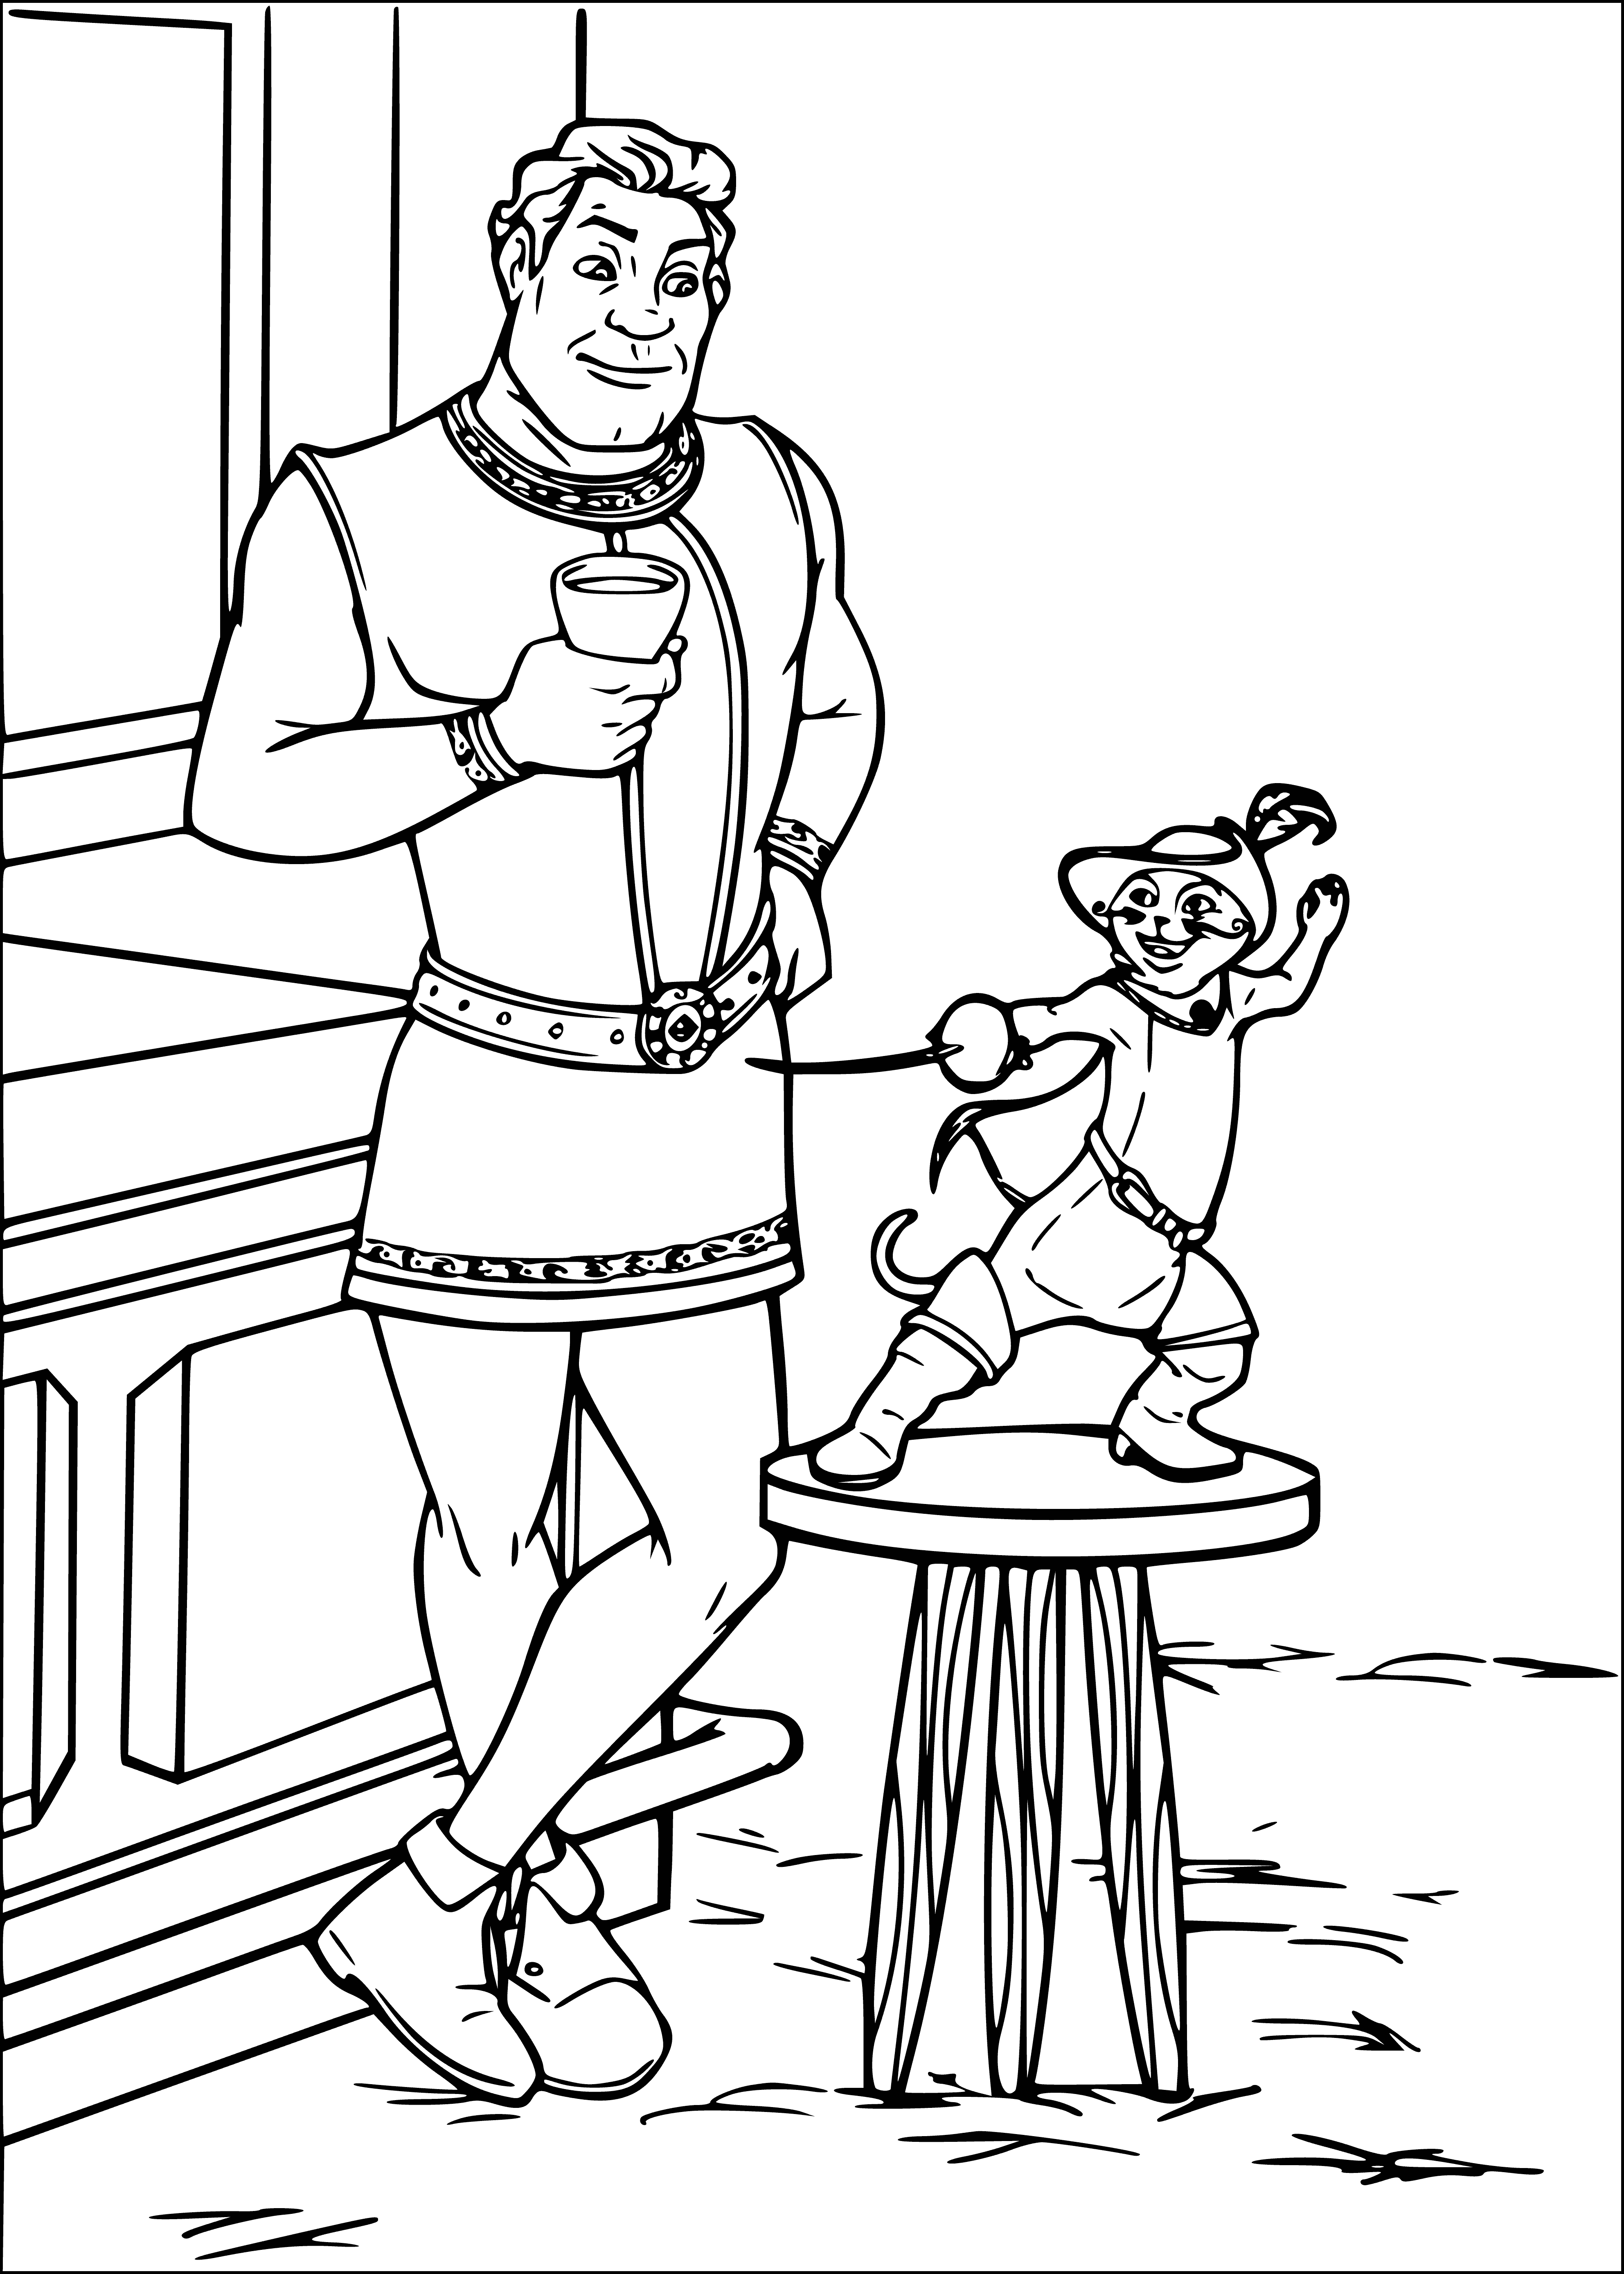 Shrek and the cat coloring page